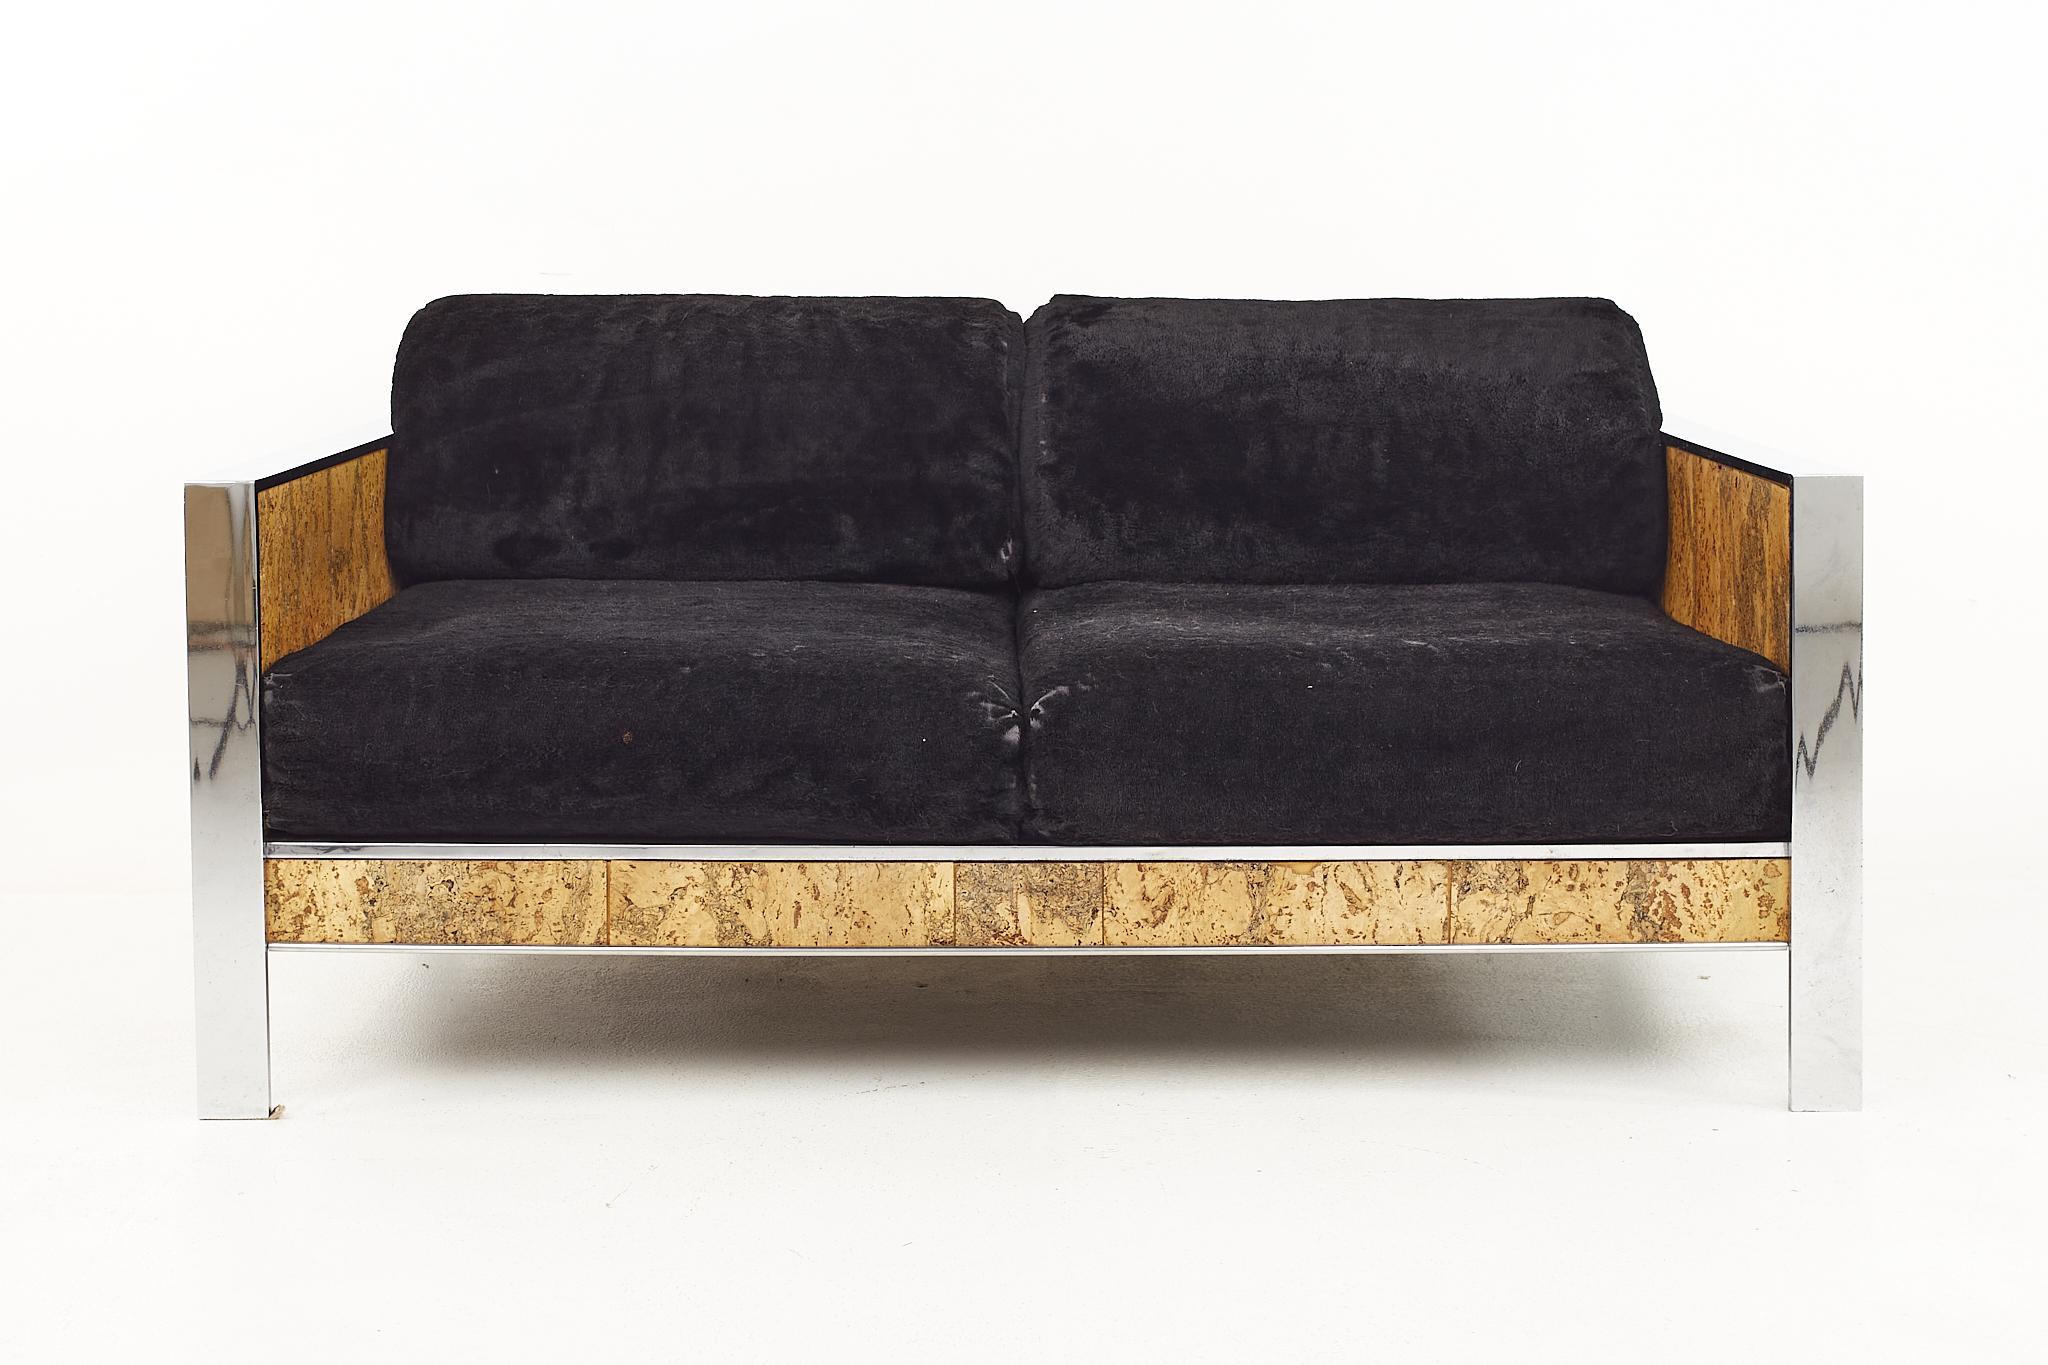 Adrian Pearsall for Craft Associates mid century cork and chrome settee

The settee measures: 57.5 wide x 35.5 deep x 27.5 high, with a seat height of 16 inches and arm height of 22 inches

Ready for new upholstery. This service is available for